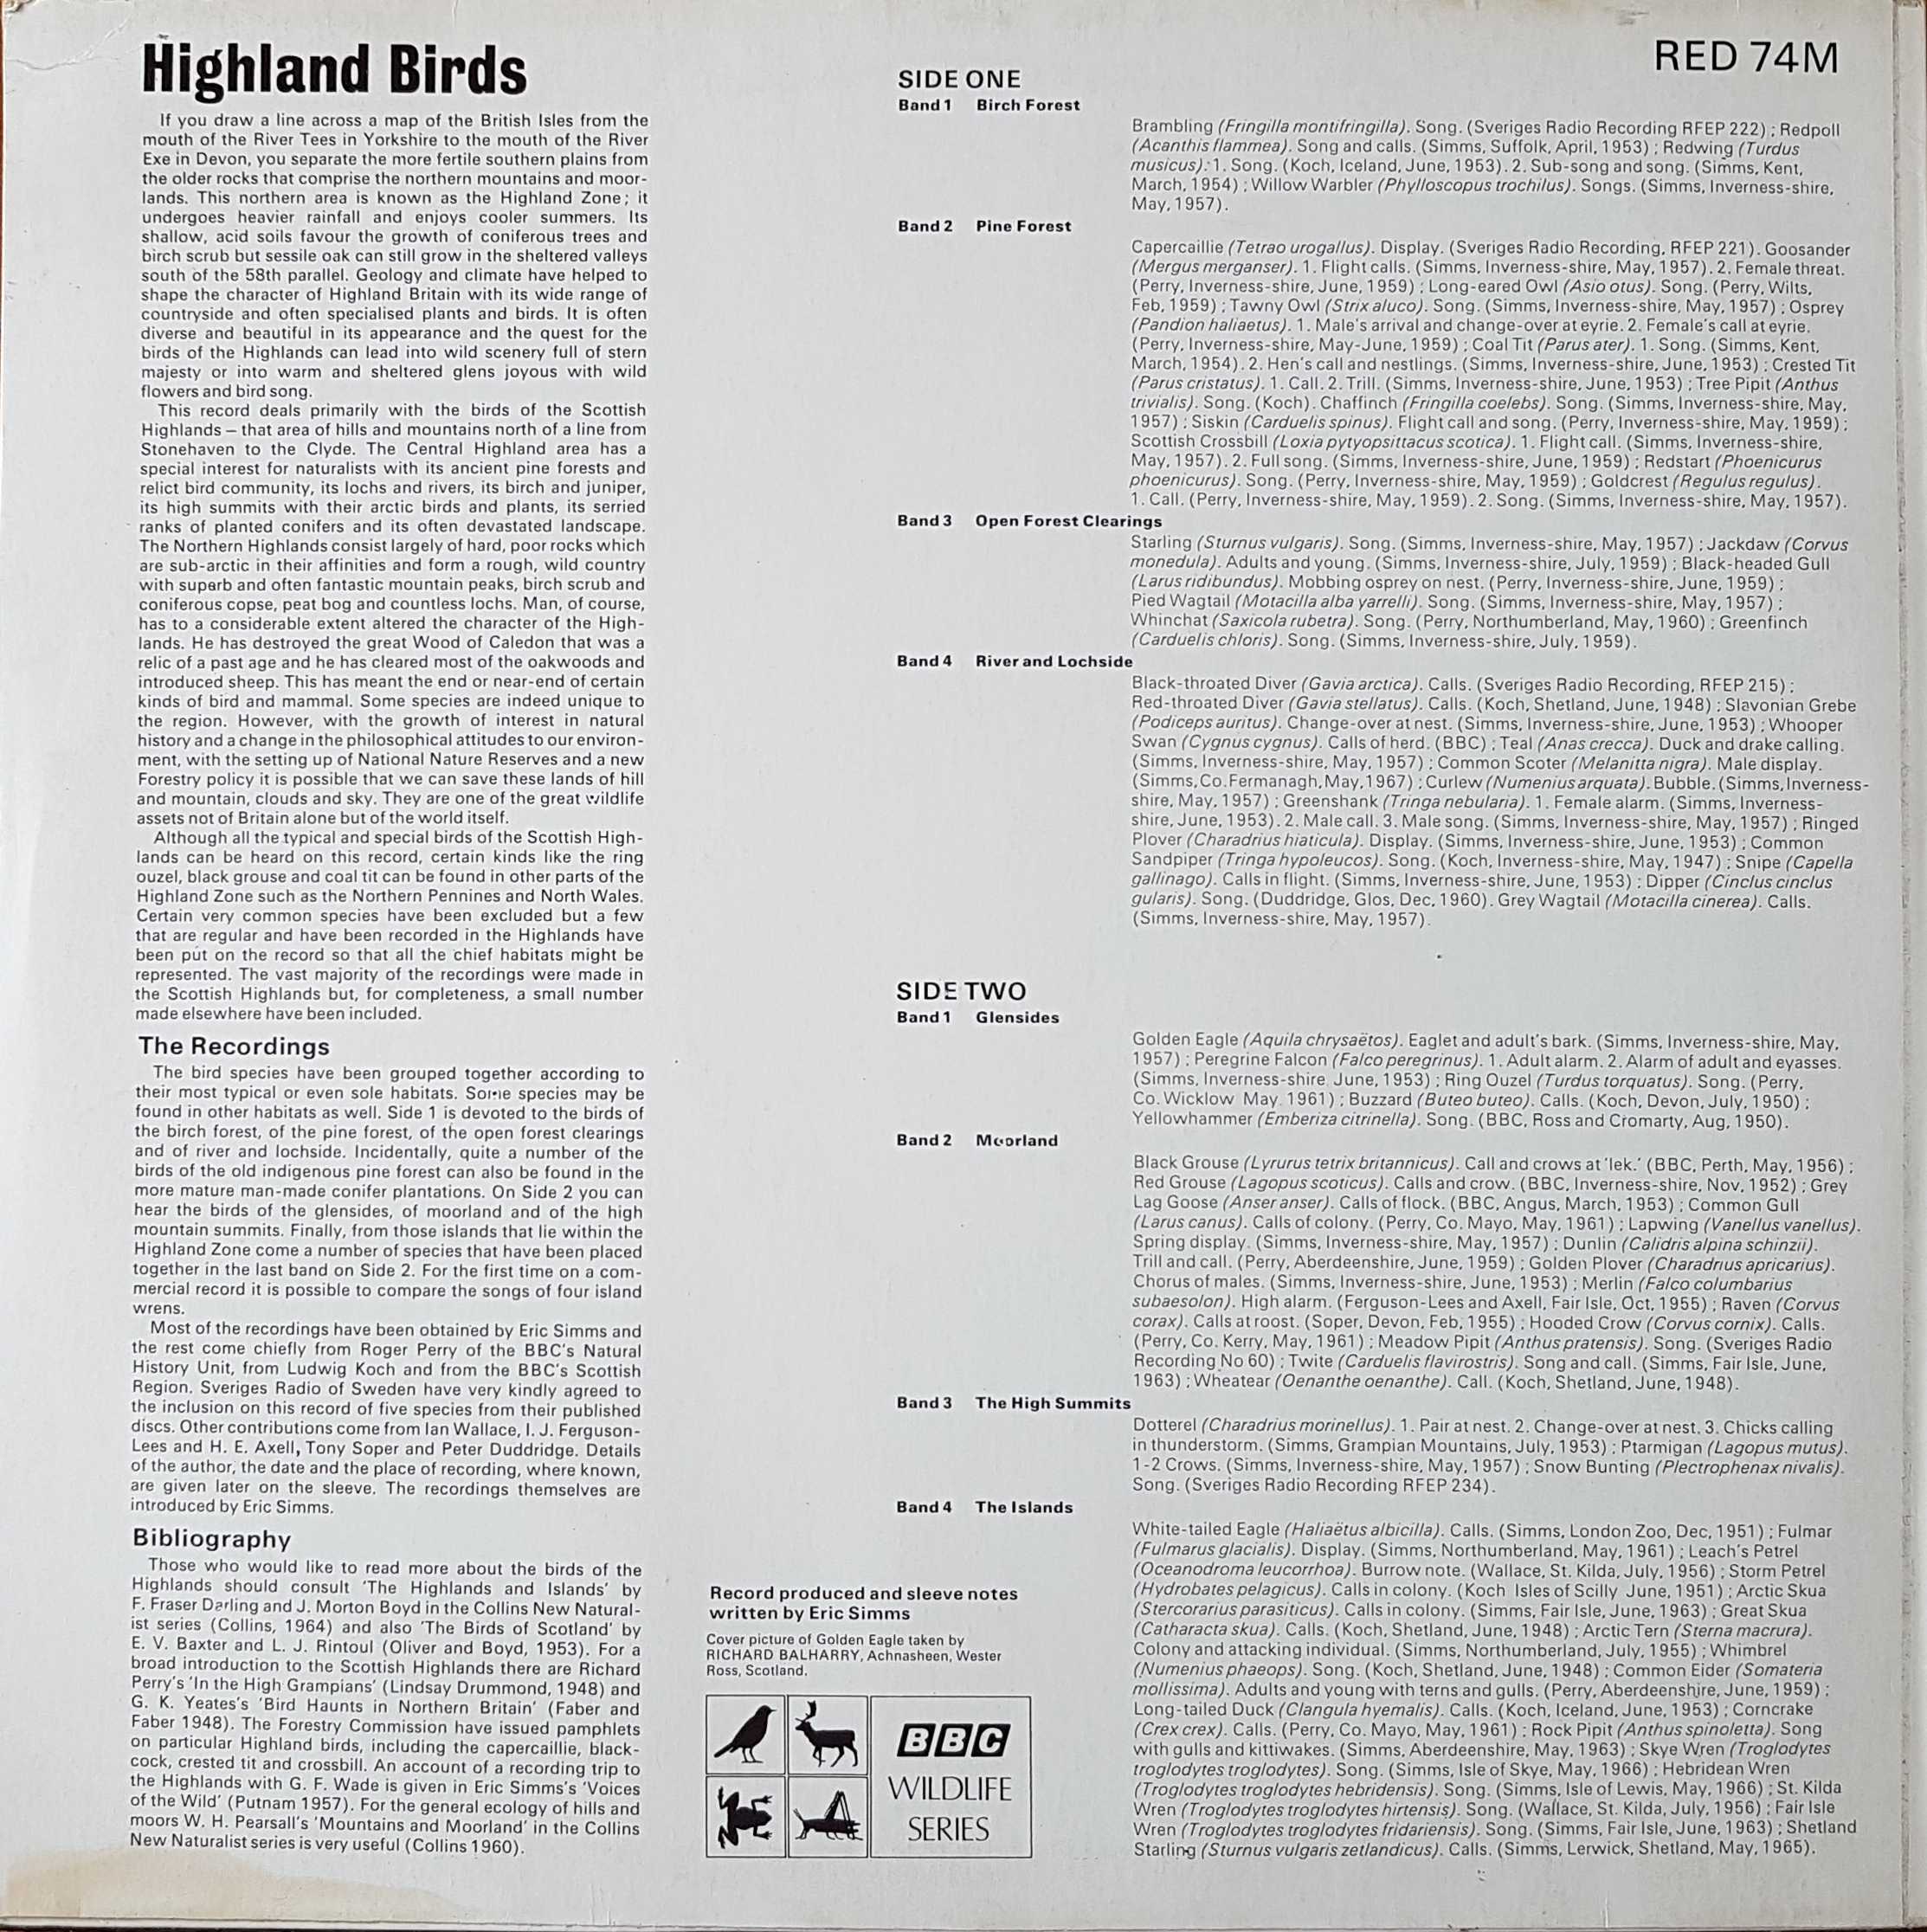 Picture of RED 74 Highland birds by artist Various from the BBC records and Tapes library